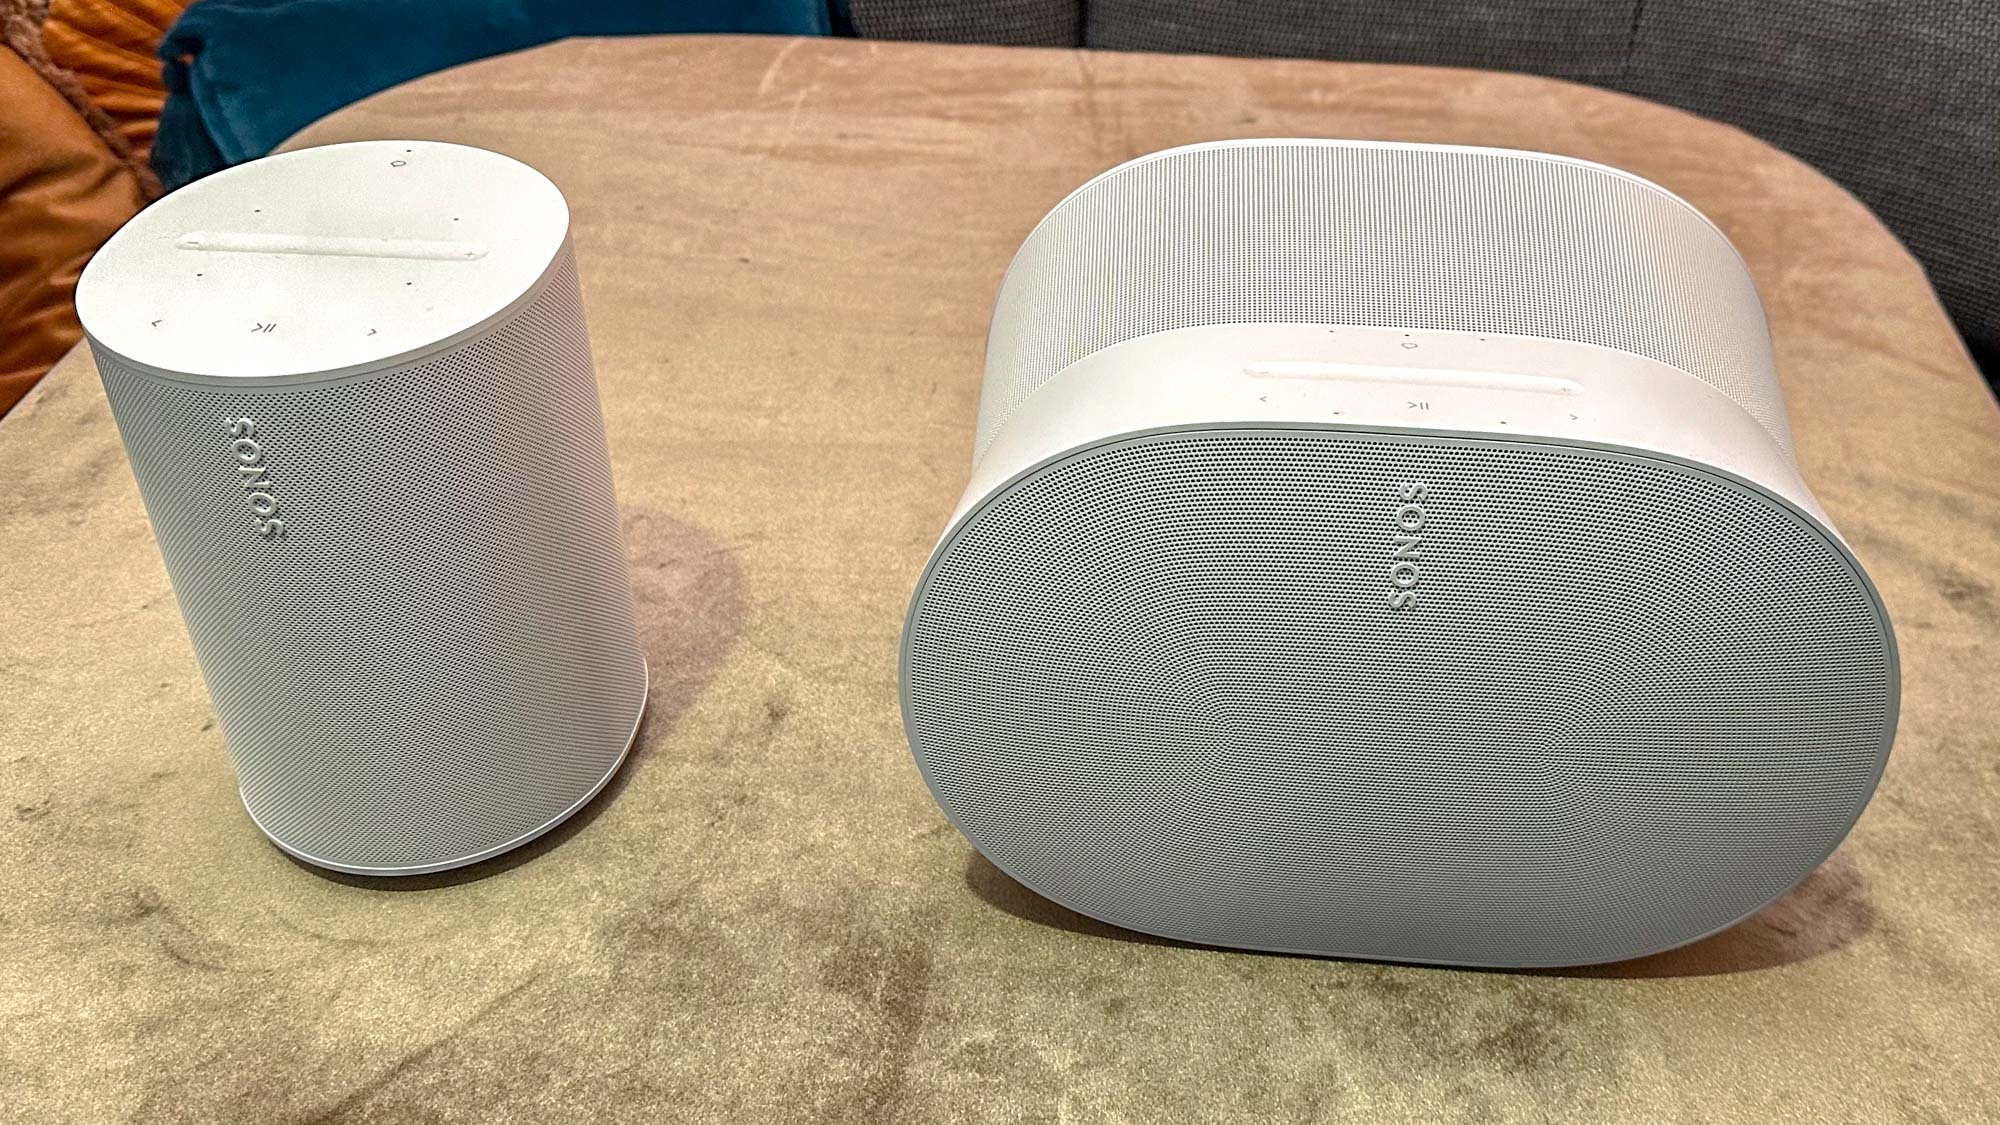 Sonos One vs Sonos Era 100: What's the difference?